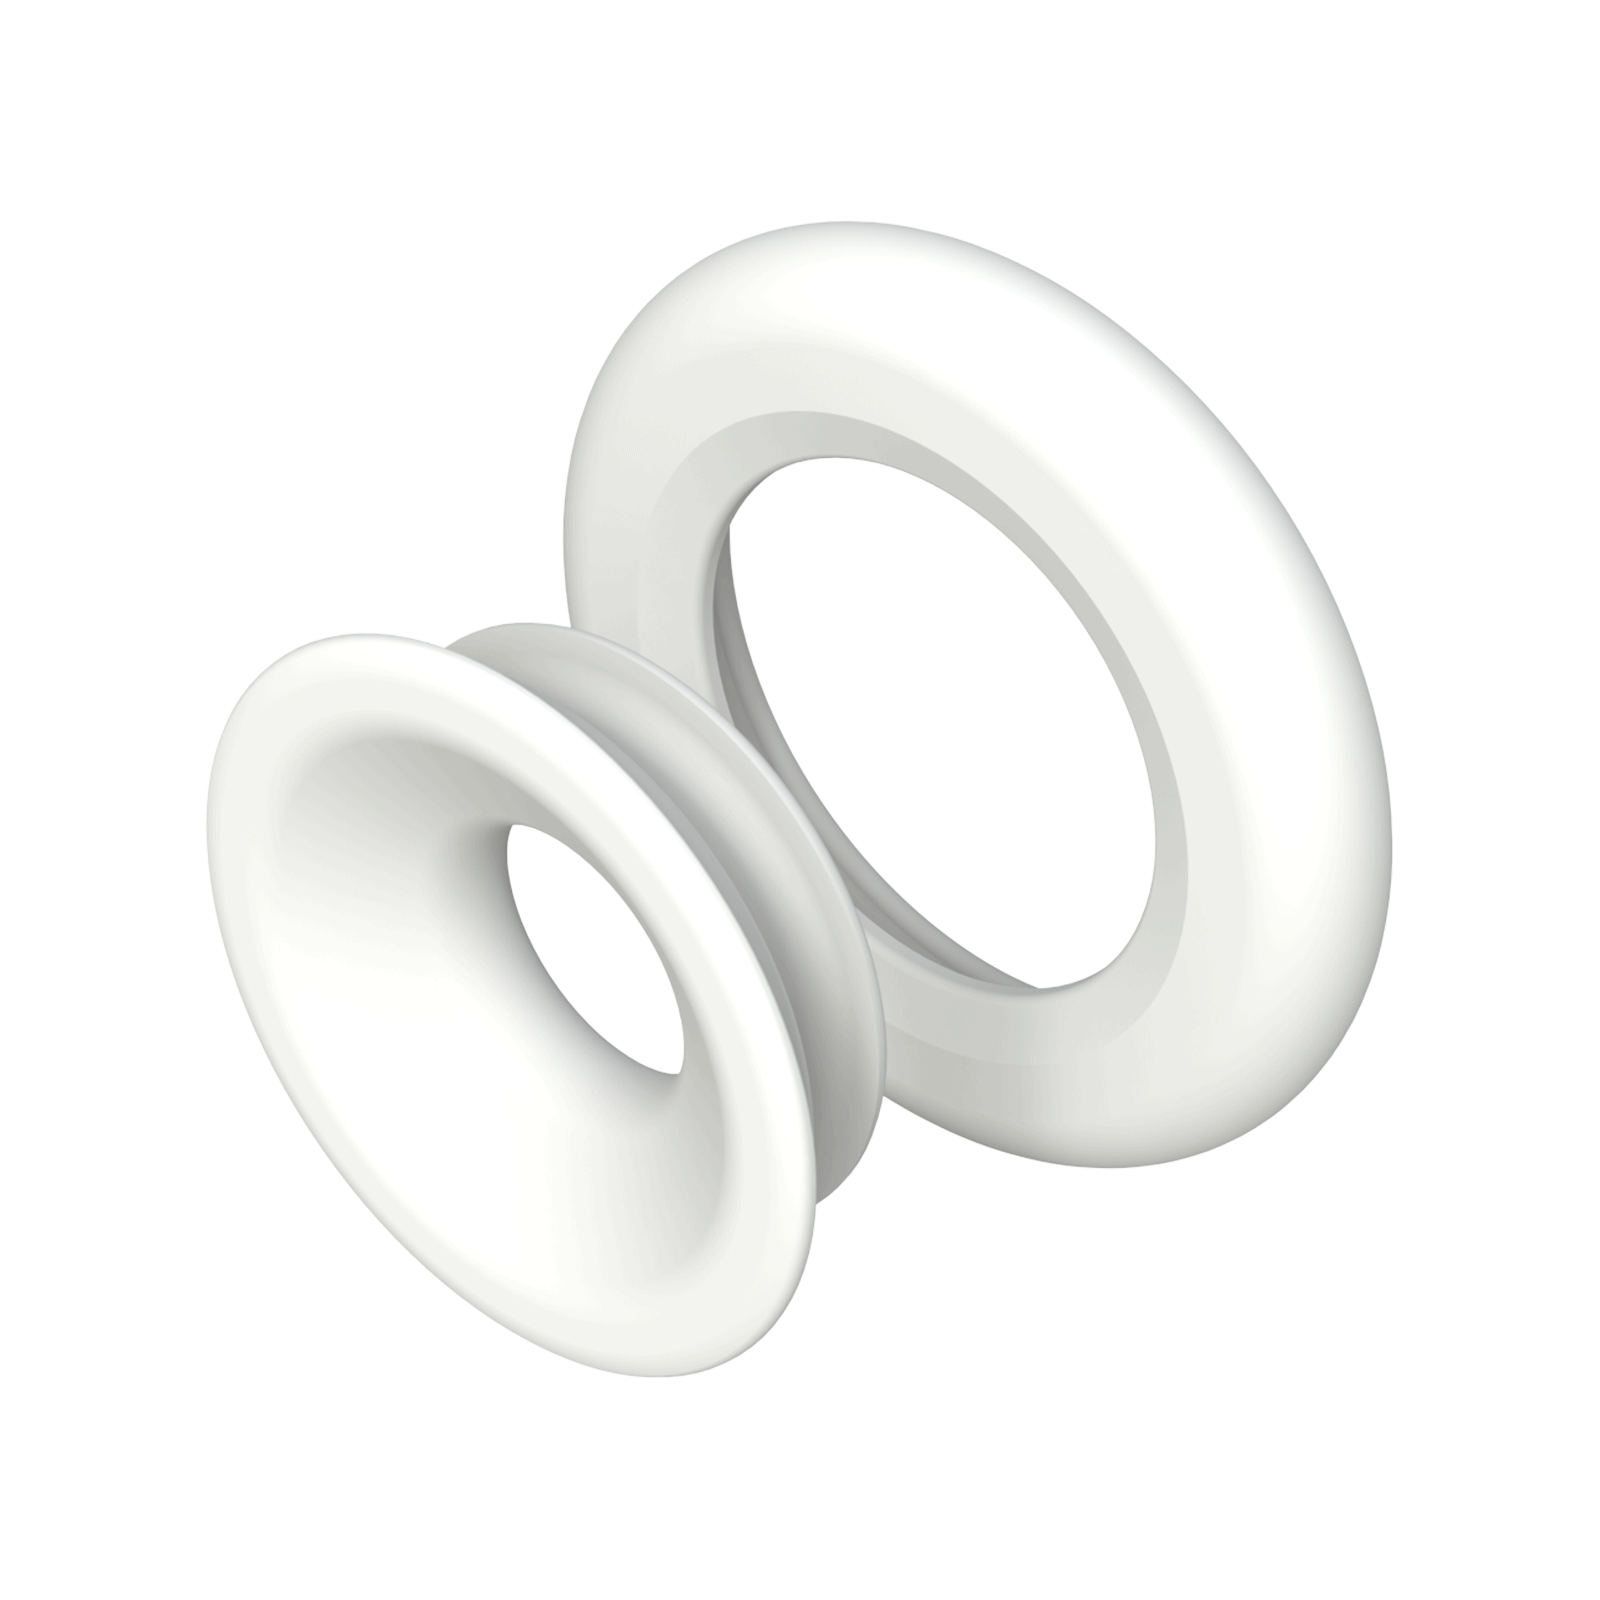 <b>ClickClix®</b> is a <b>patented system to join textiles</b>. Each <b>ClickClix®</b> set consists of two pieces, a male button and a female ring that acts as an anchor or fixation. It is available in <b>three models</b> that are distinguished by the depth of the pieces, so each model is suitable for fabrics of different thicknesses: <br/>
<br/>
* <b>ClickClix® S</b>: Model intended for the finest fabrics. Especially recommended in its application to join socks and prevent the pairs from being lost during the washing process. <br/>
* <b>ClickClix® M</b>: Ideal for medium thickness fabrics. A common use is in the duvet cover. Other applications are to identify garments with buttons of different colors or to close the pillowcases. <br/>
* <b>ClickClix® L</b>: Created to fix and join duvets, it is also suitable for clipping towels, rags and other thicker fabrics. <br/>
These buttons can be installed using the <b>ClickClix® tool</b>, a clamp specifically designed to perform this task quickly and efficiently. <br/>
<br/>
All models have an equivalent diameter, so they are <b>compatible</b> with each other and multiply the possible applications. Another peculiarity of the ClickClix® button system is the possibility of joining them sequentially and infinitely, as shown in the video. They can also be used in combination with the <b><a href='https://www.isc-sl.com/clickclixr-adhesive/iscy/' target='_parent'> ClickClix® ISCY Adhesive </a></b> to applications such as hanging towels and rags or attaching the shower curtain to the wall. <br/>
<br/>
<b>ClickClix</b>® (model S) has had a crucial importance  for our SockFix® product  to be considered as a <b><i>winner</b></i> in the <a href=https://ifdesign.com/en/winner-ranking/project/sockfixschool-the-pair-of-sox-that-never-get-lost/307620 target='_blank'> <b>iF Design Awards</a></b> and as a <b>finalist</b> of the awards <a href=https://www.fad.cat/adi-fad/es/news/5245/projectes-seleccionats-dels-premis-adi' target='_blank'> <b>Delta ADI-FAD</a></b> by <b><i>reinventing the sock</b></i> and solving the problem of lost pairs.
<br/><br/>
For more information, you can consult <b><a href='https://www.click-clix.com/'  target='_blank'>our web ClickClix® </a></b> or contact our commercial department.
<br/>